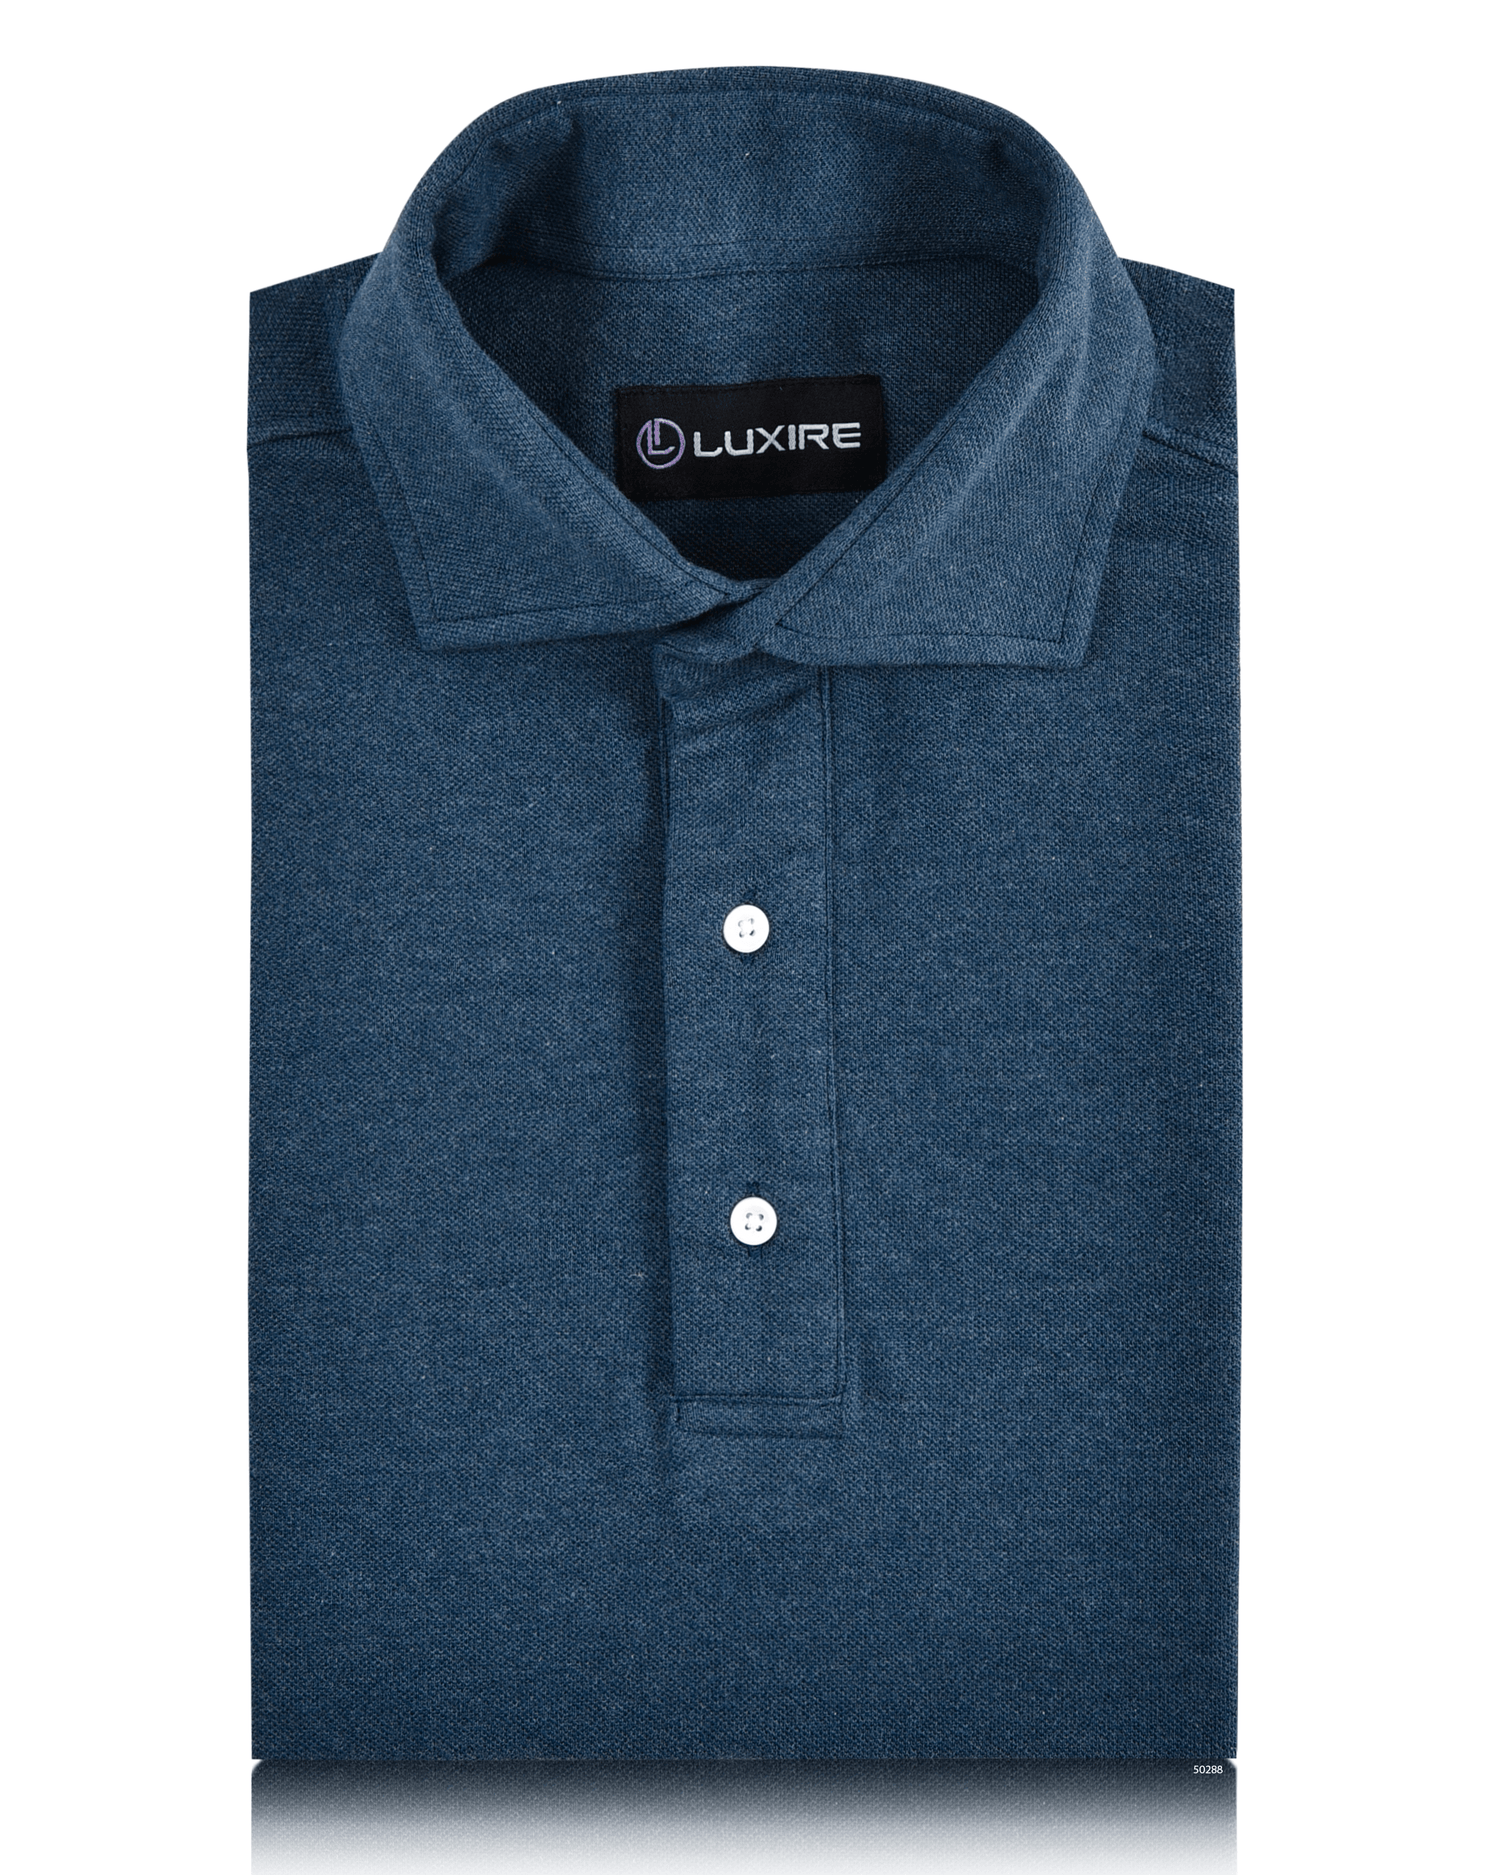 Front of the custom oxford polo shirt for men by Luxire in dark blue grey